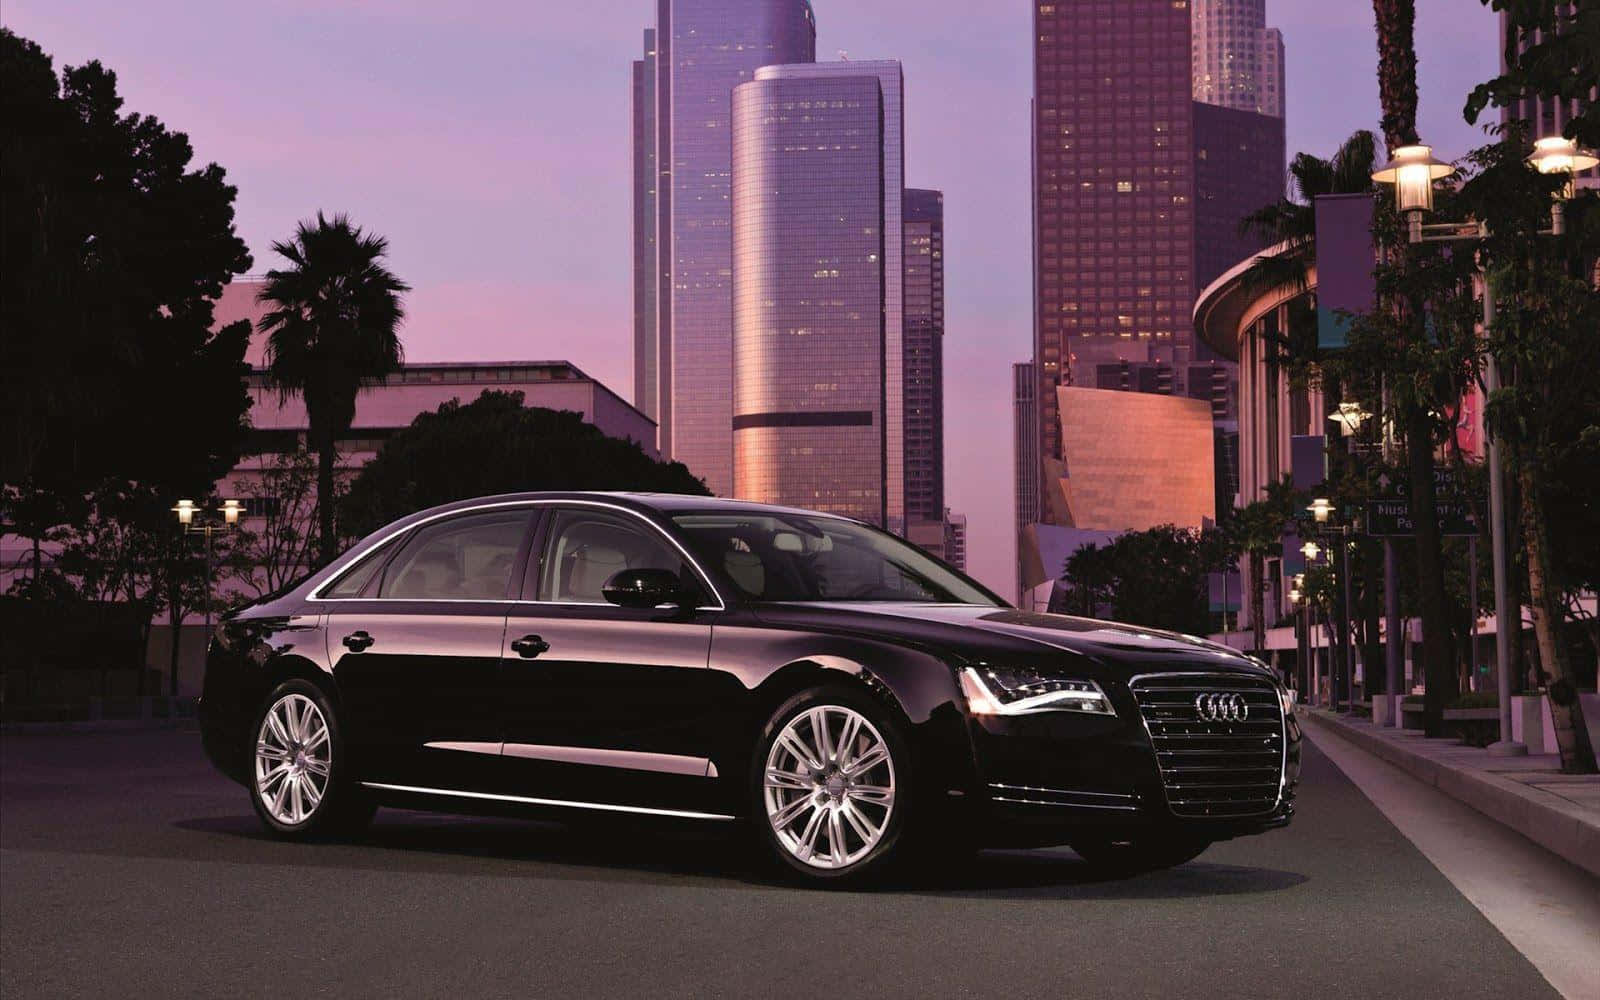 Luxury and Power - The Audi S8 Wallpaper